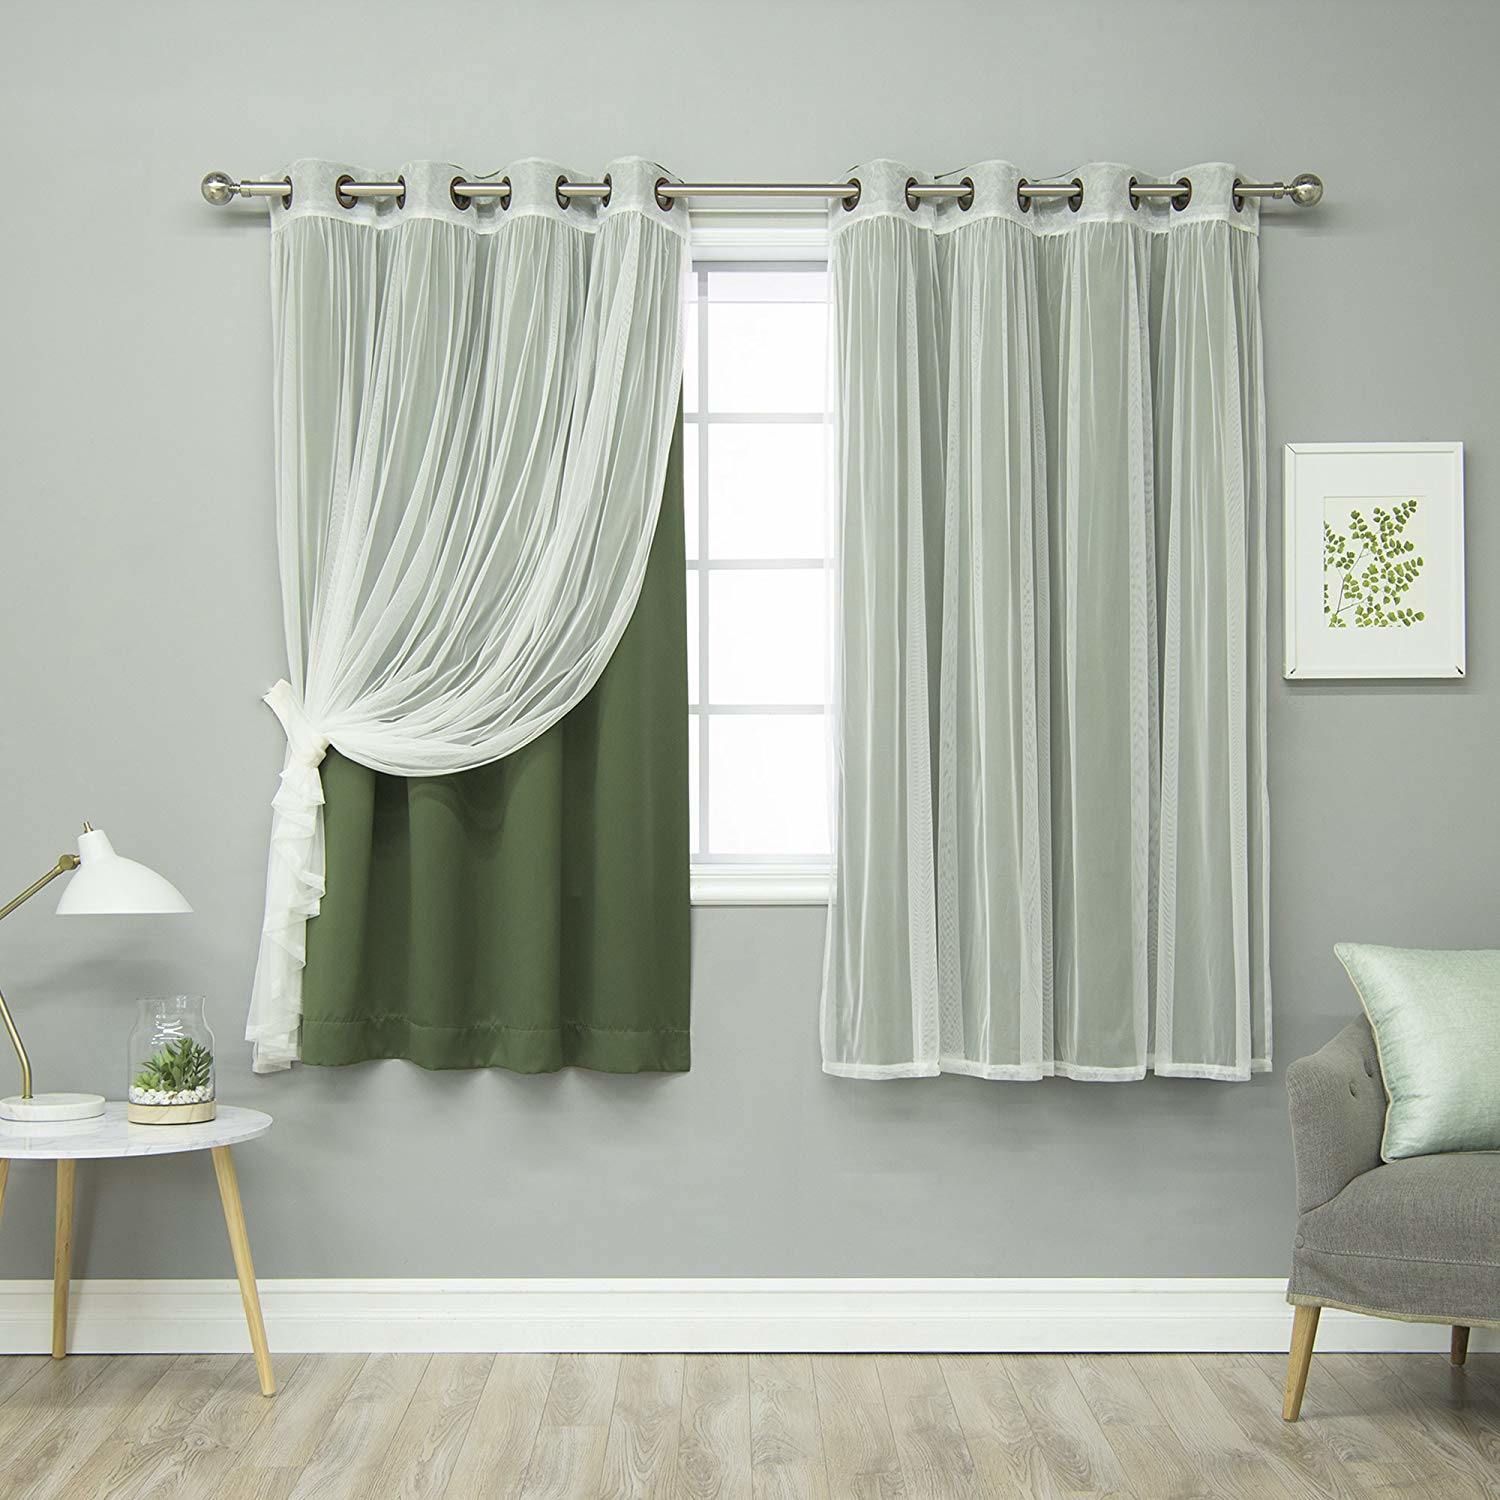 [hot Item] Moss Home Fashion Mix And Match Tulle Sheer Lace And Blackout 4  Piece Curtain Set Antique Bronze Grommet Top 52" W X 84" L Curtain Pertaining To Mix &amp; Match Blackout Tulle Lace Bronze Grommet Curtain Panel Sets (View 9 of 20)